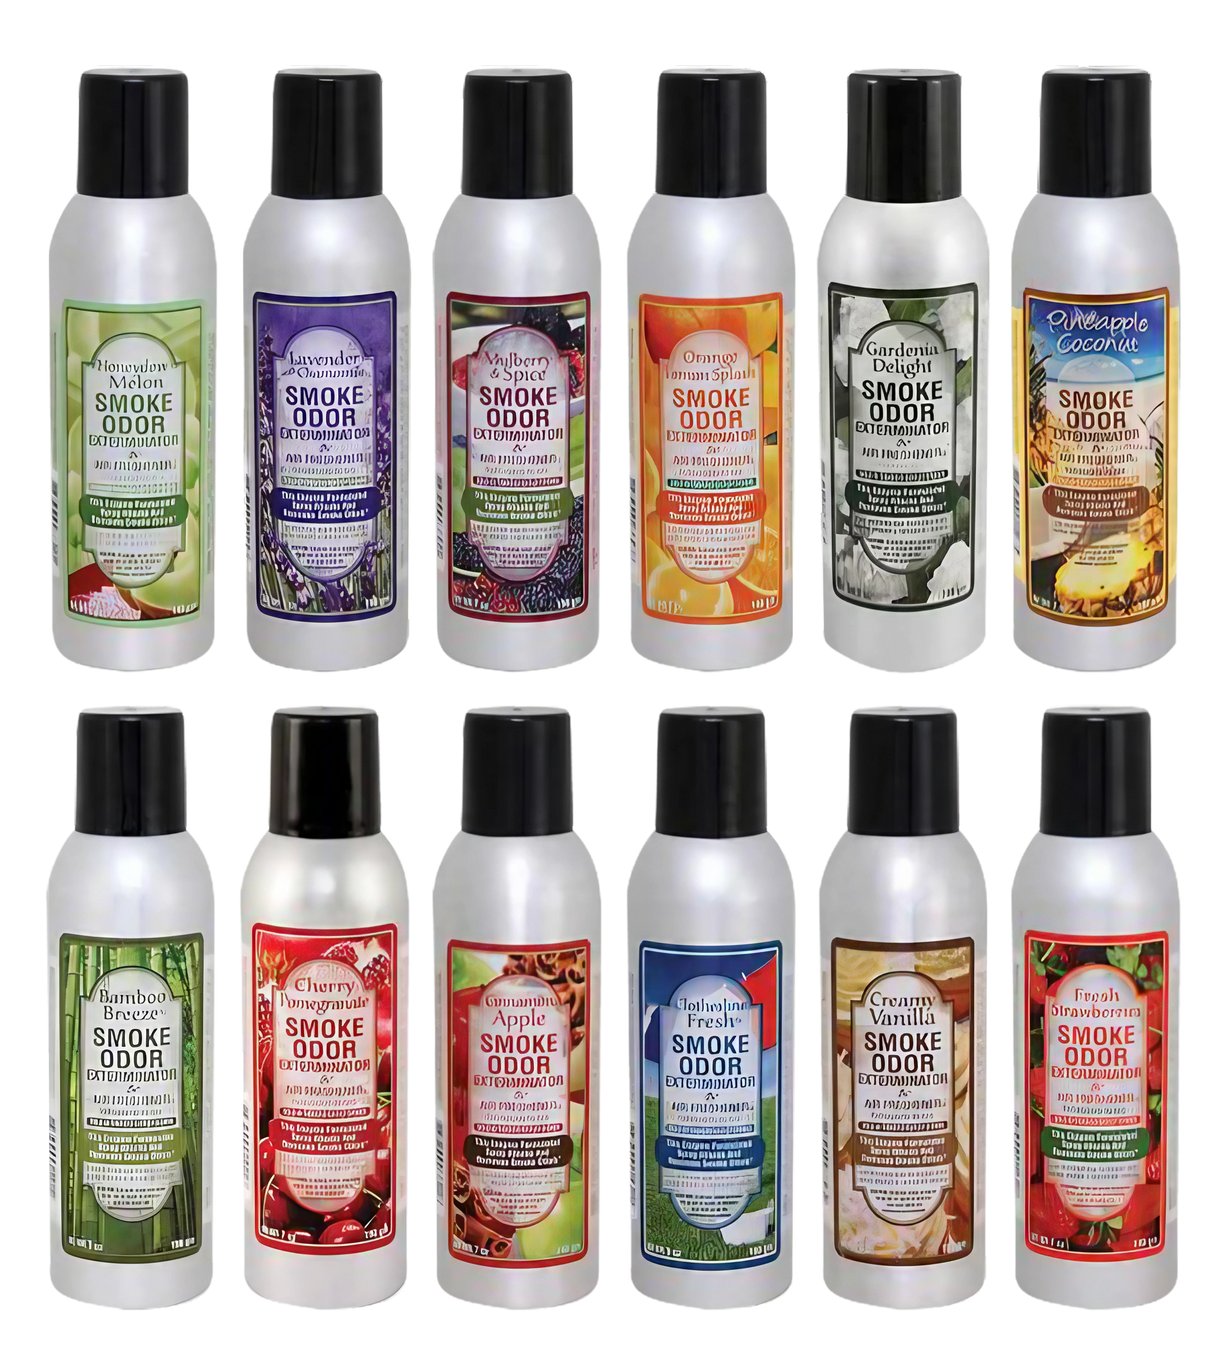 Assorted Smoke Odor Exterminator Sprays 7 oz 12-pack in various scents displayed front view